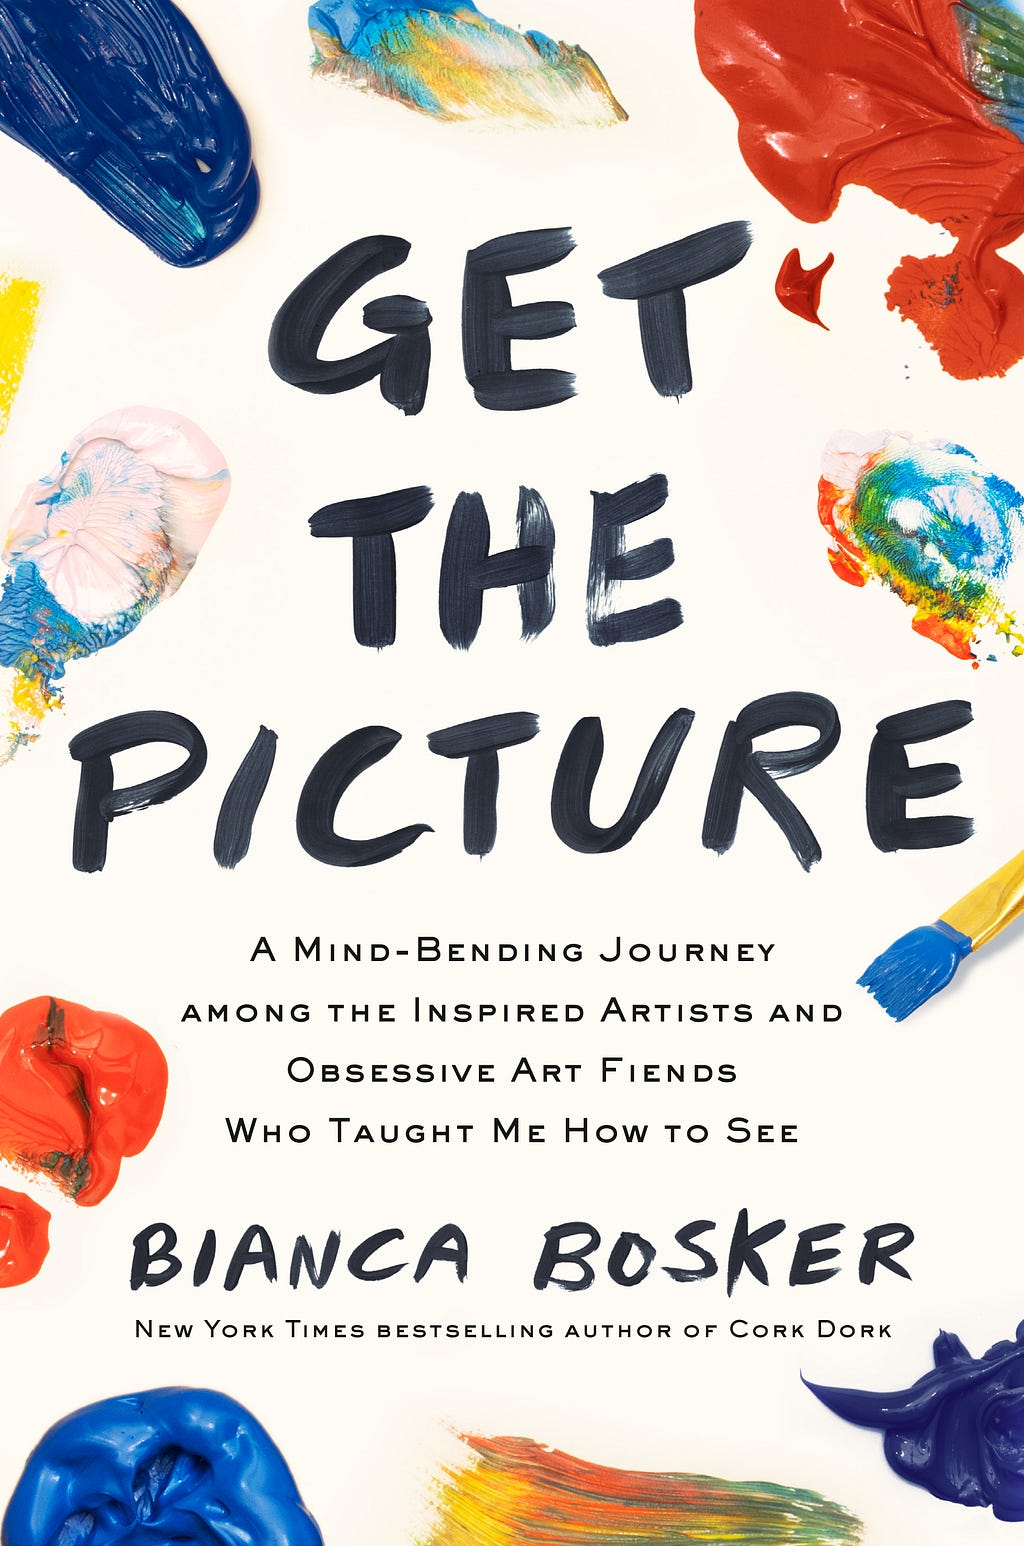 Get the Picture: A Mind-Bending Journey Among the Inspired Artists and Obsessive Art Fiends Who Taught Me How to See E book